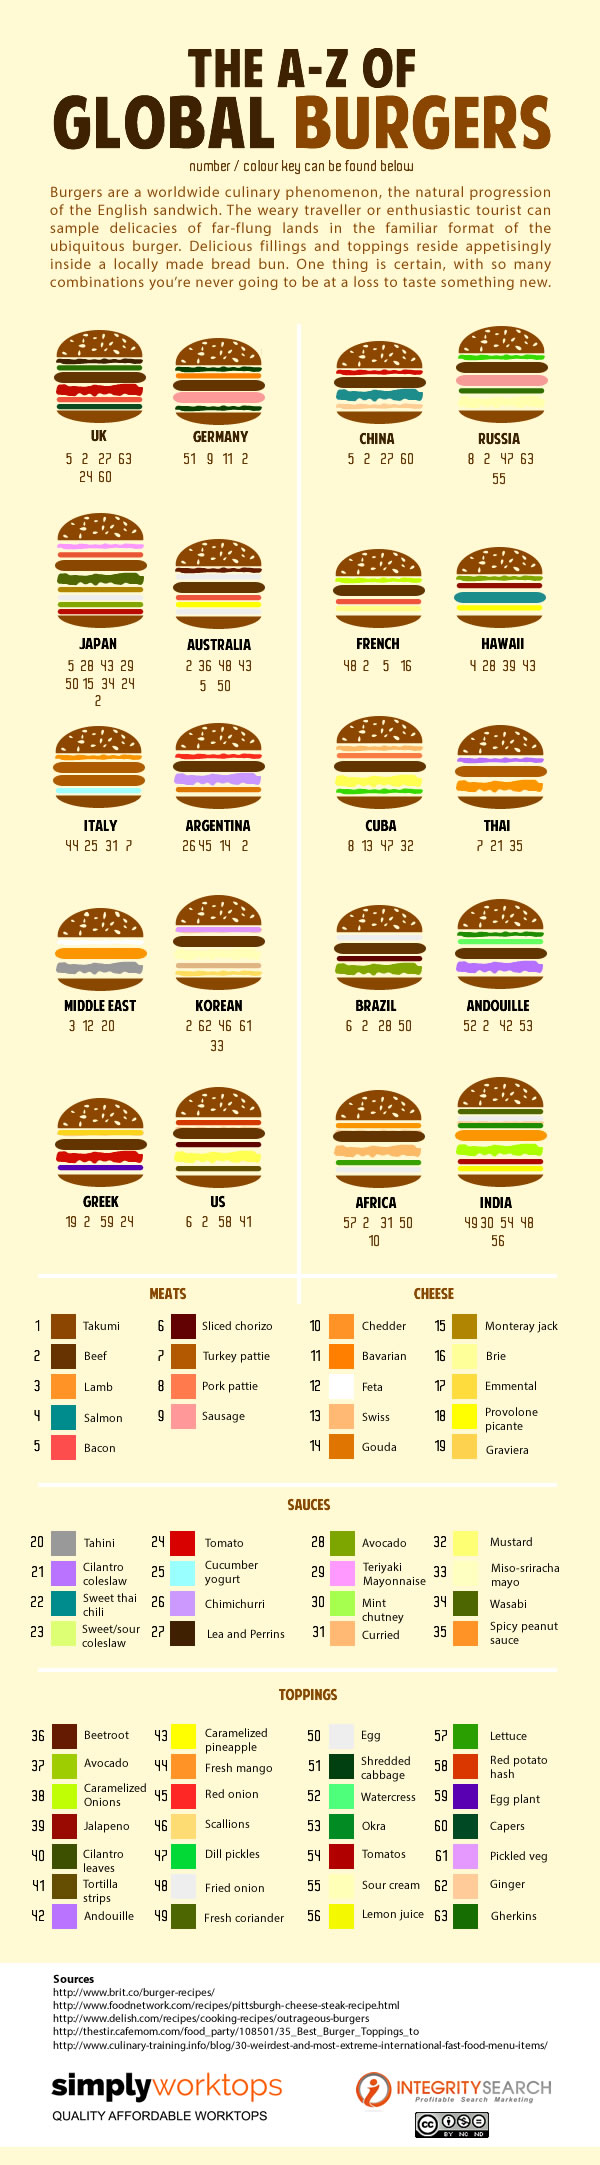 The_A-Z_of_Global_Burgers_infographic_j_jpeg